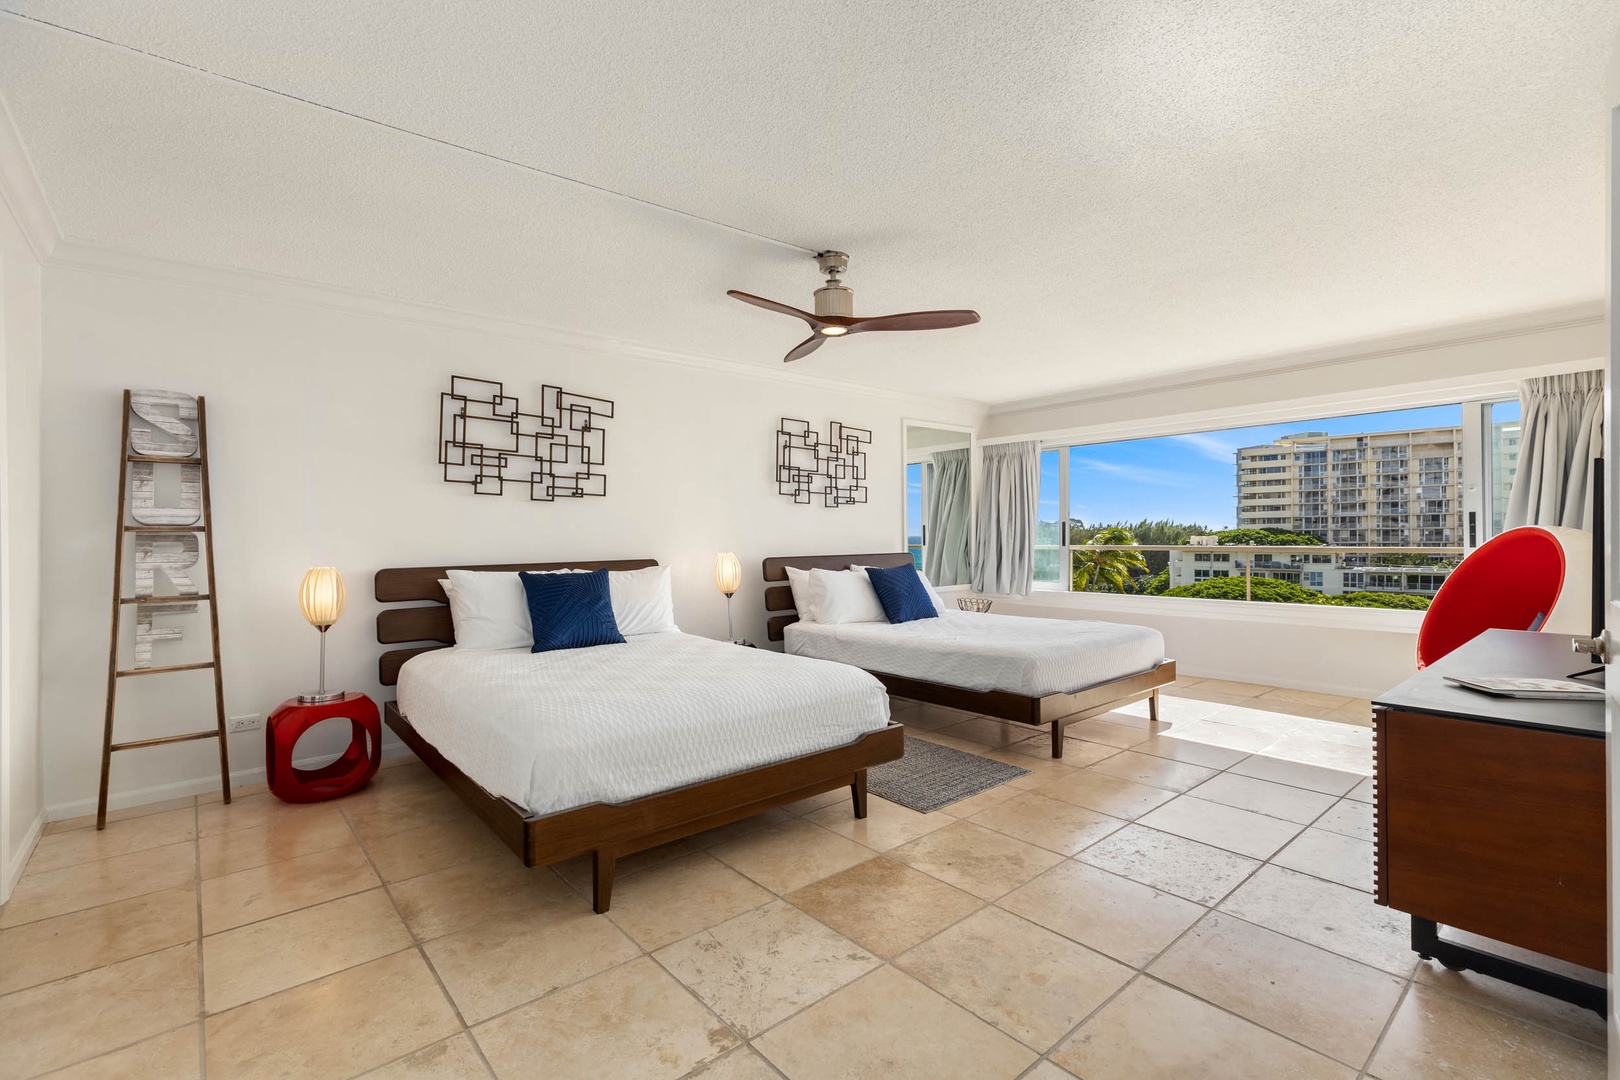 Honolulu Vacation Rentals, Colony Surf Getaway - Stylish two-bed guest bedroom with comfortable beds and a refreshing view, ideal for relaxation or guests.